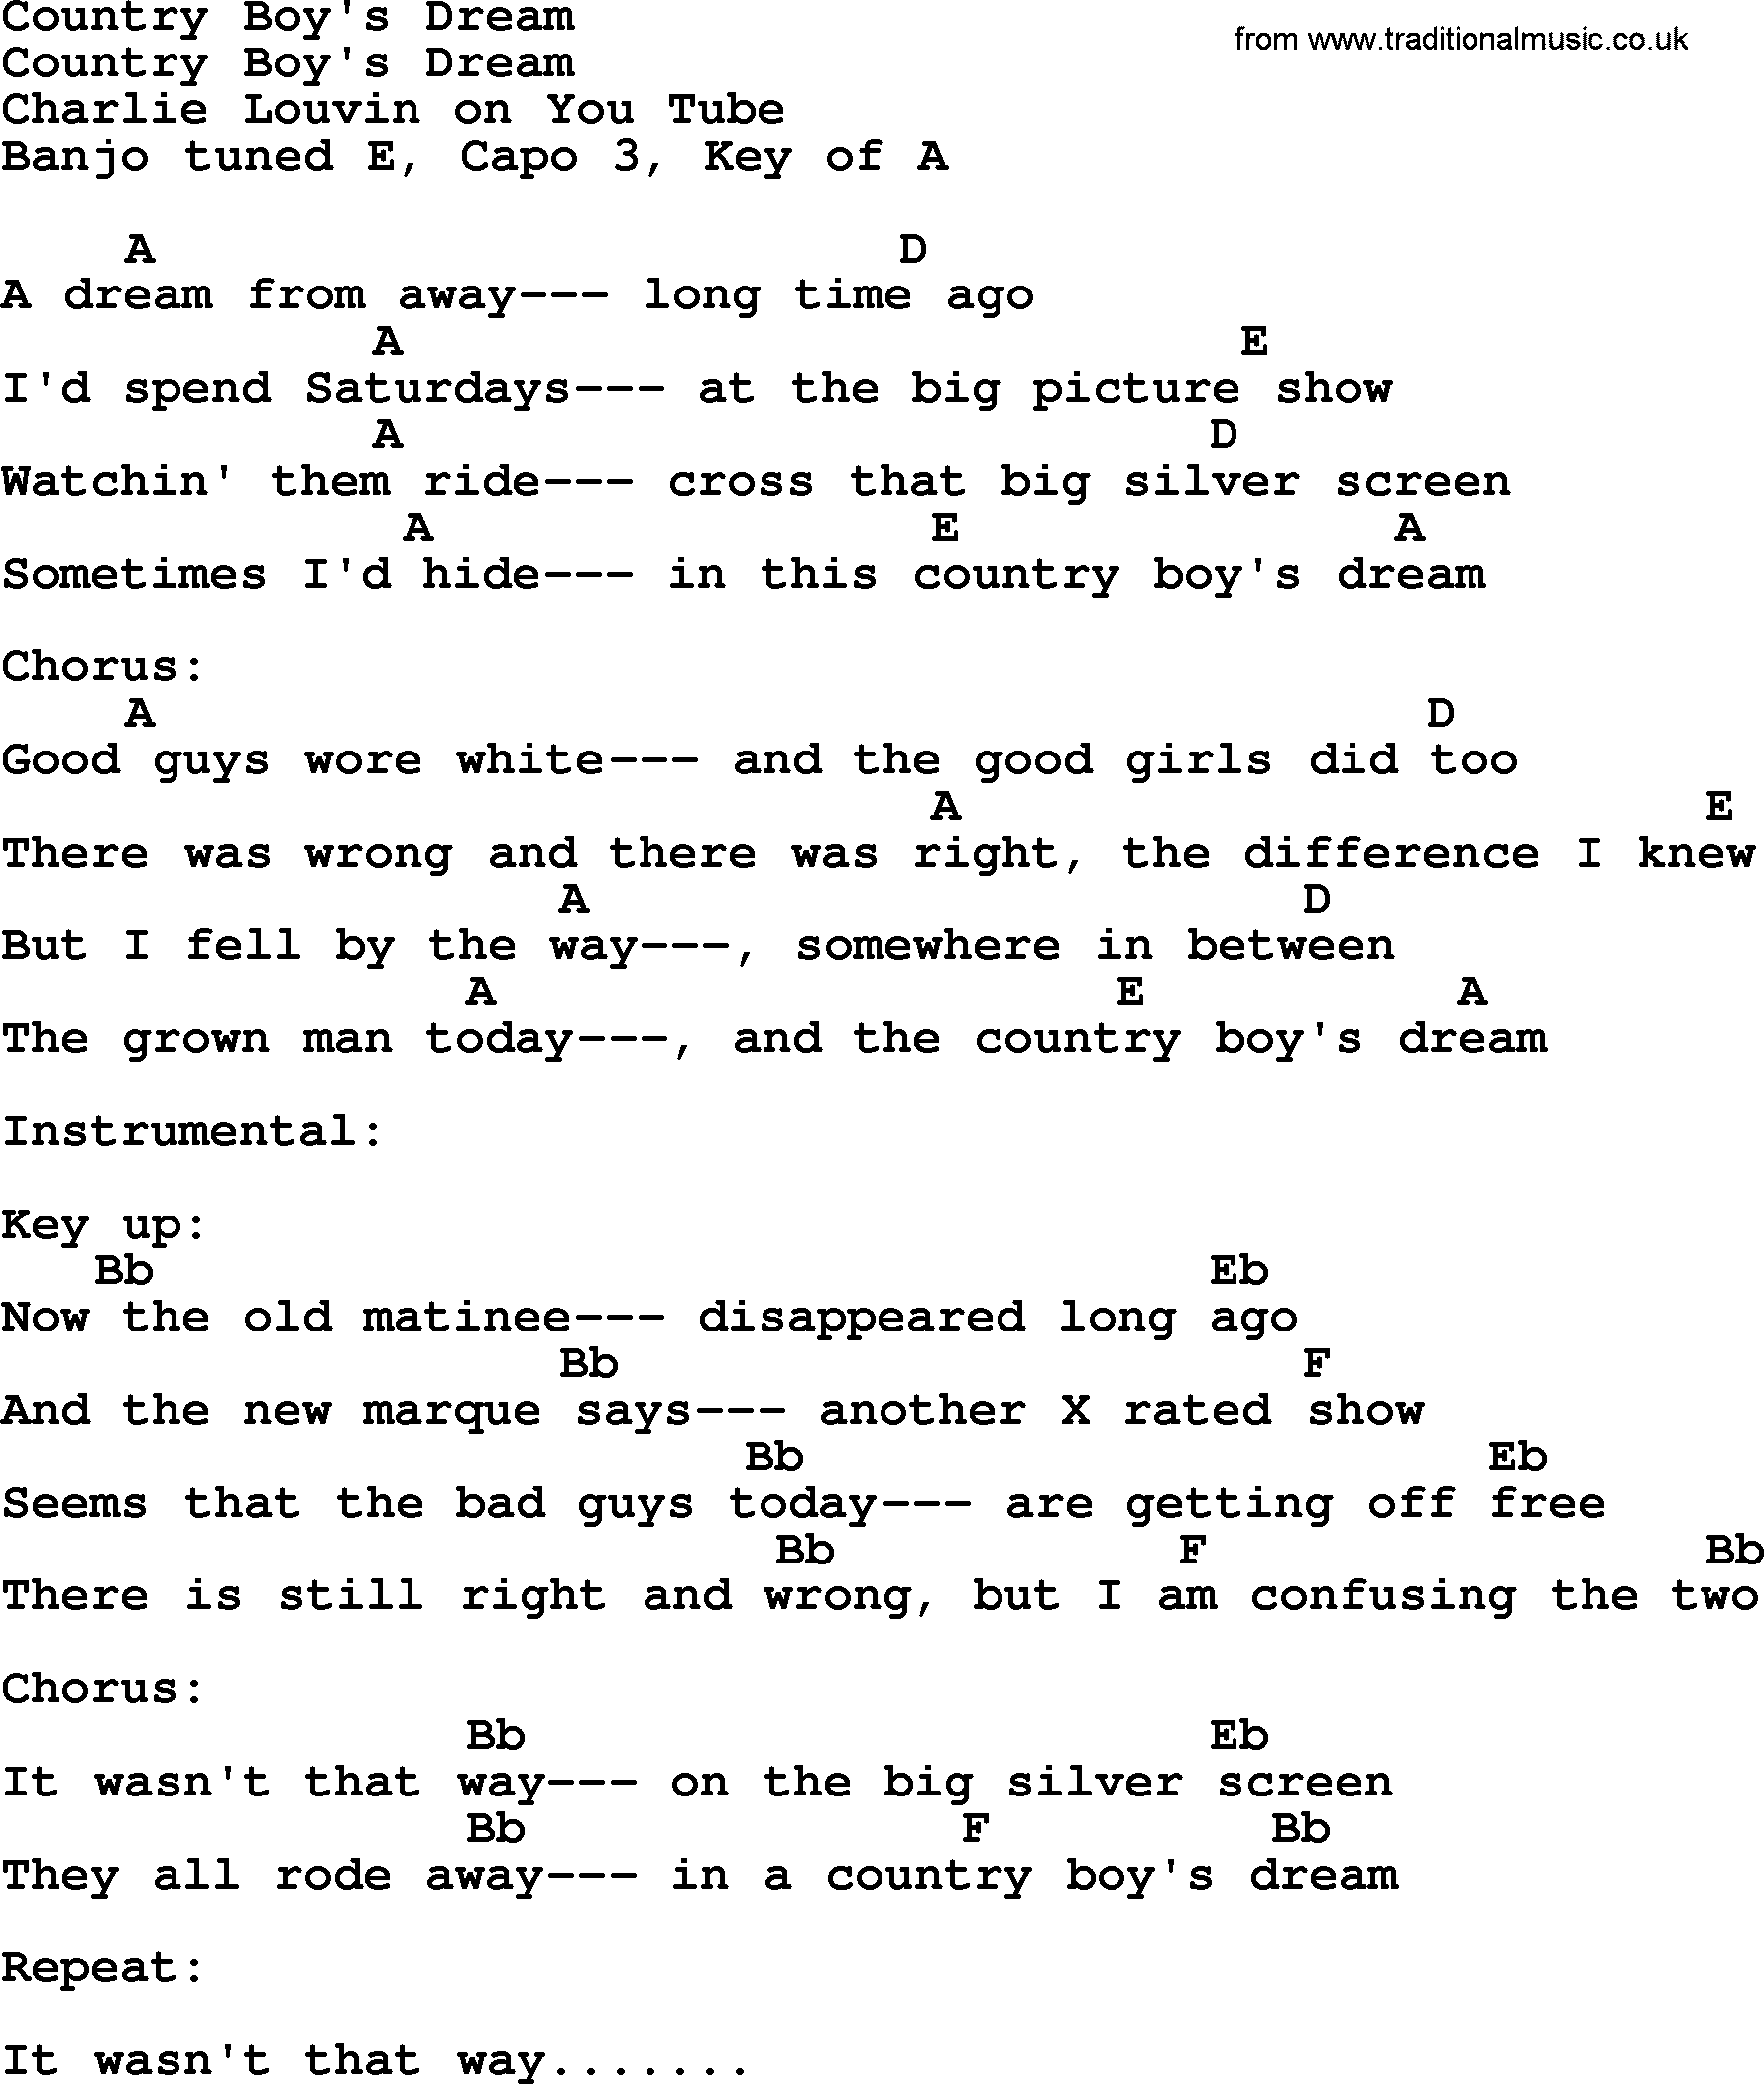 Bluegrass song: Country Boy's Dream, lyrics and chords